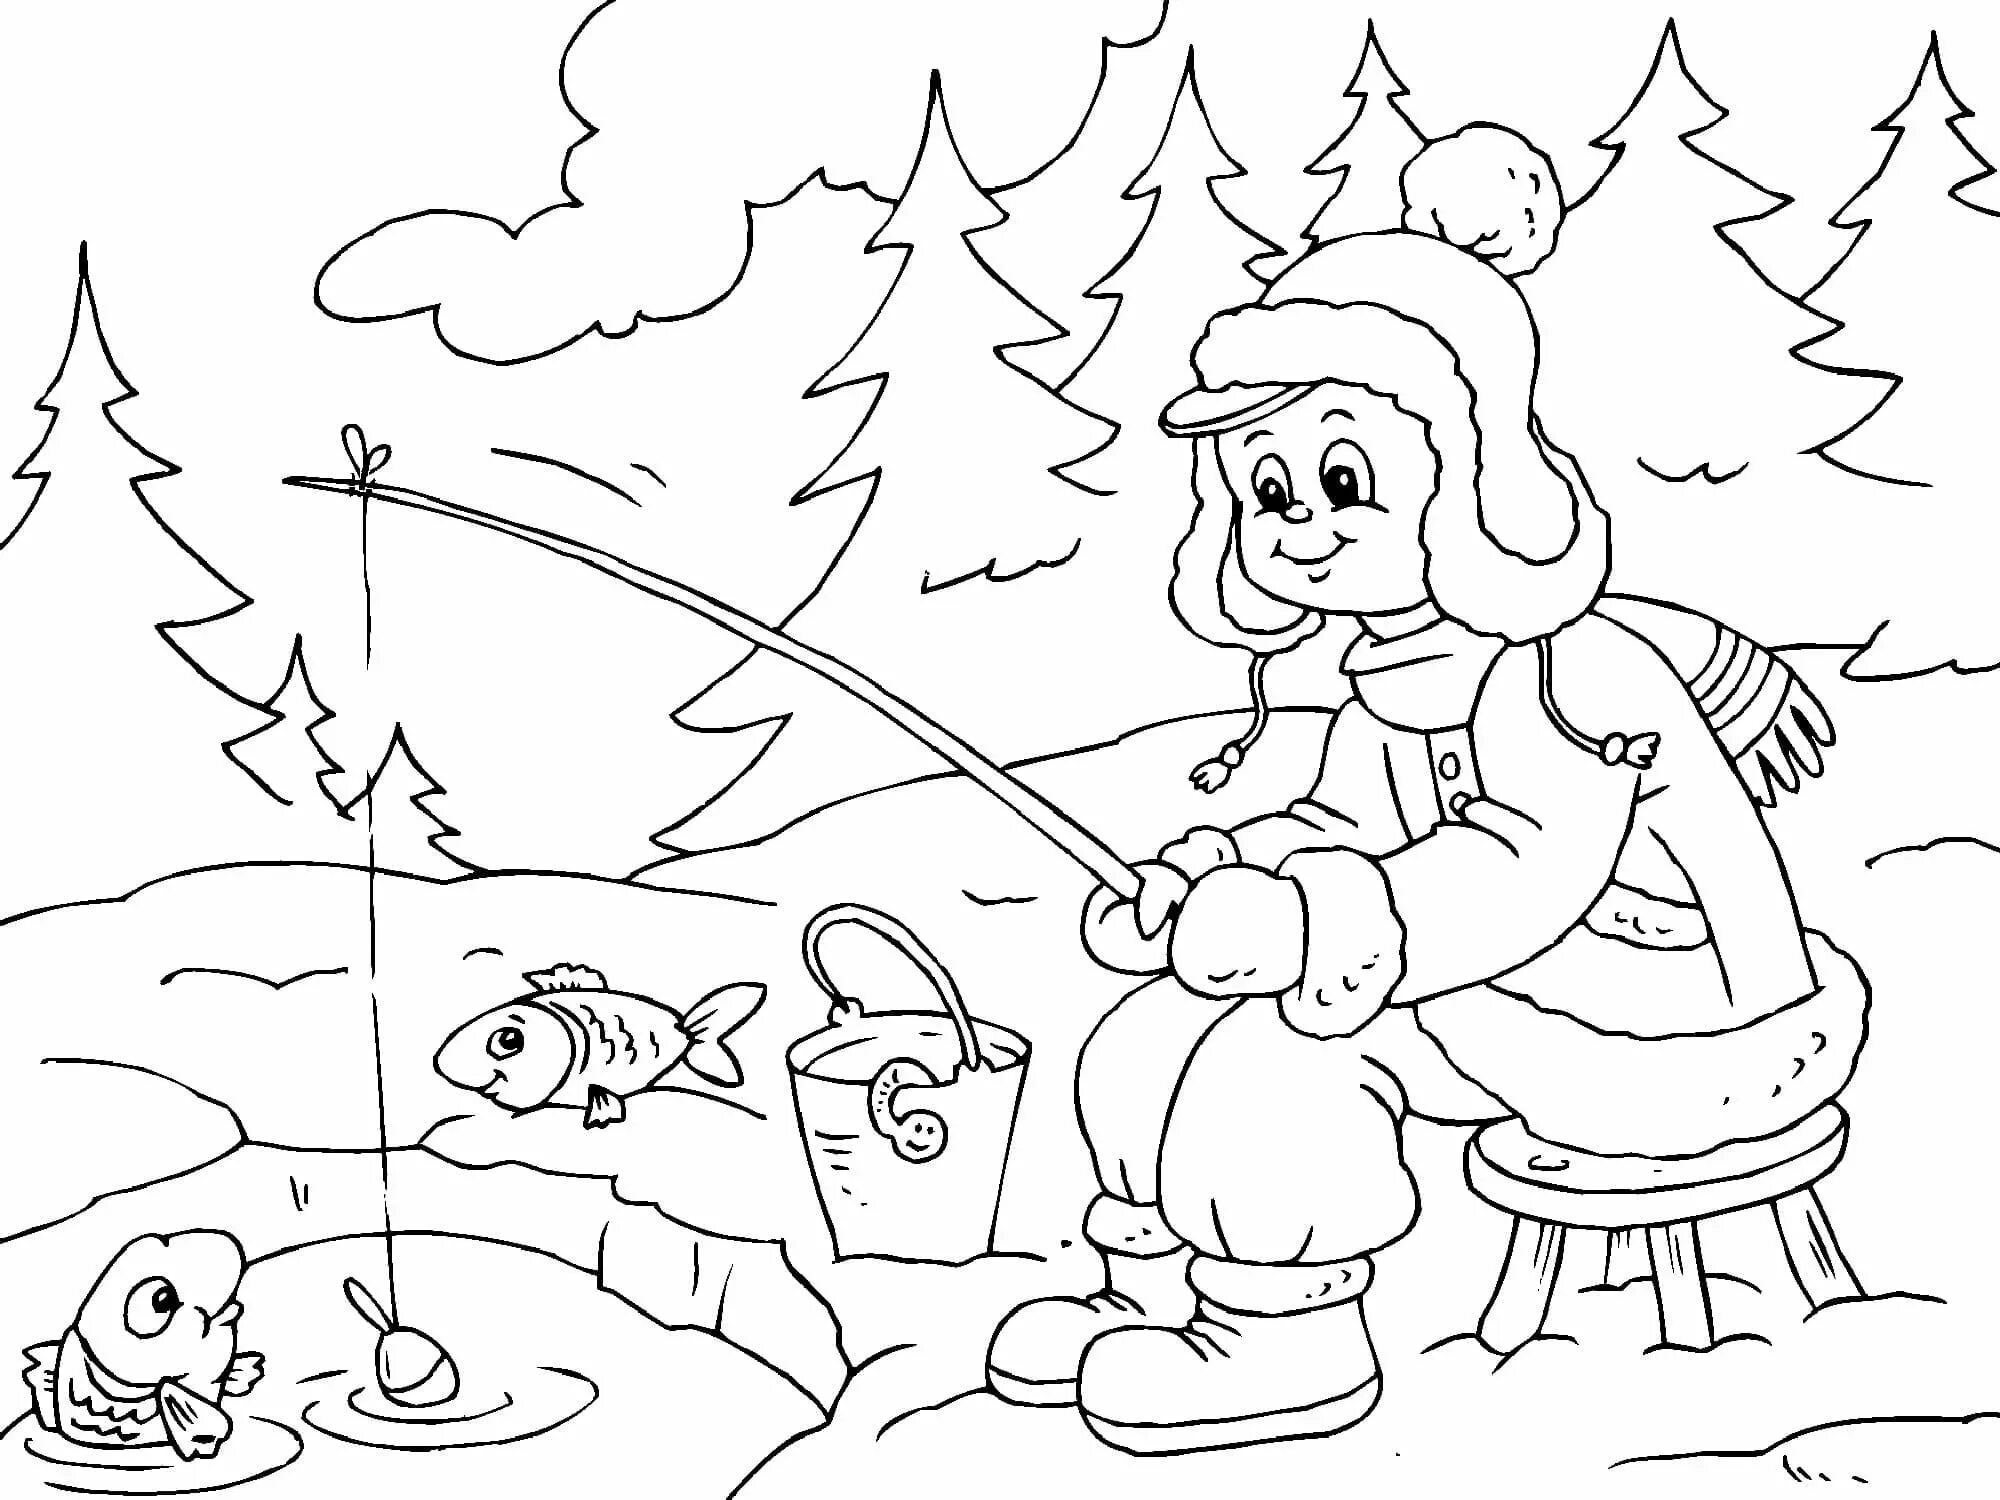 Ecstatic kys coloring pages for kids